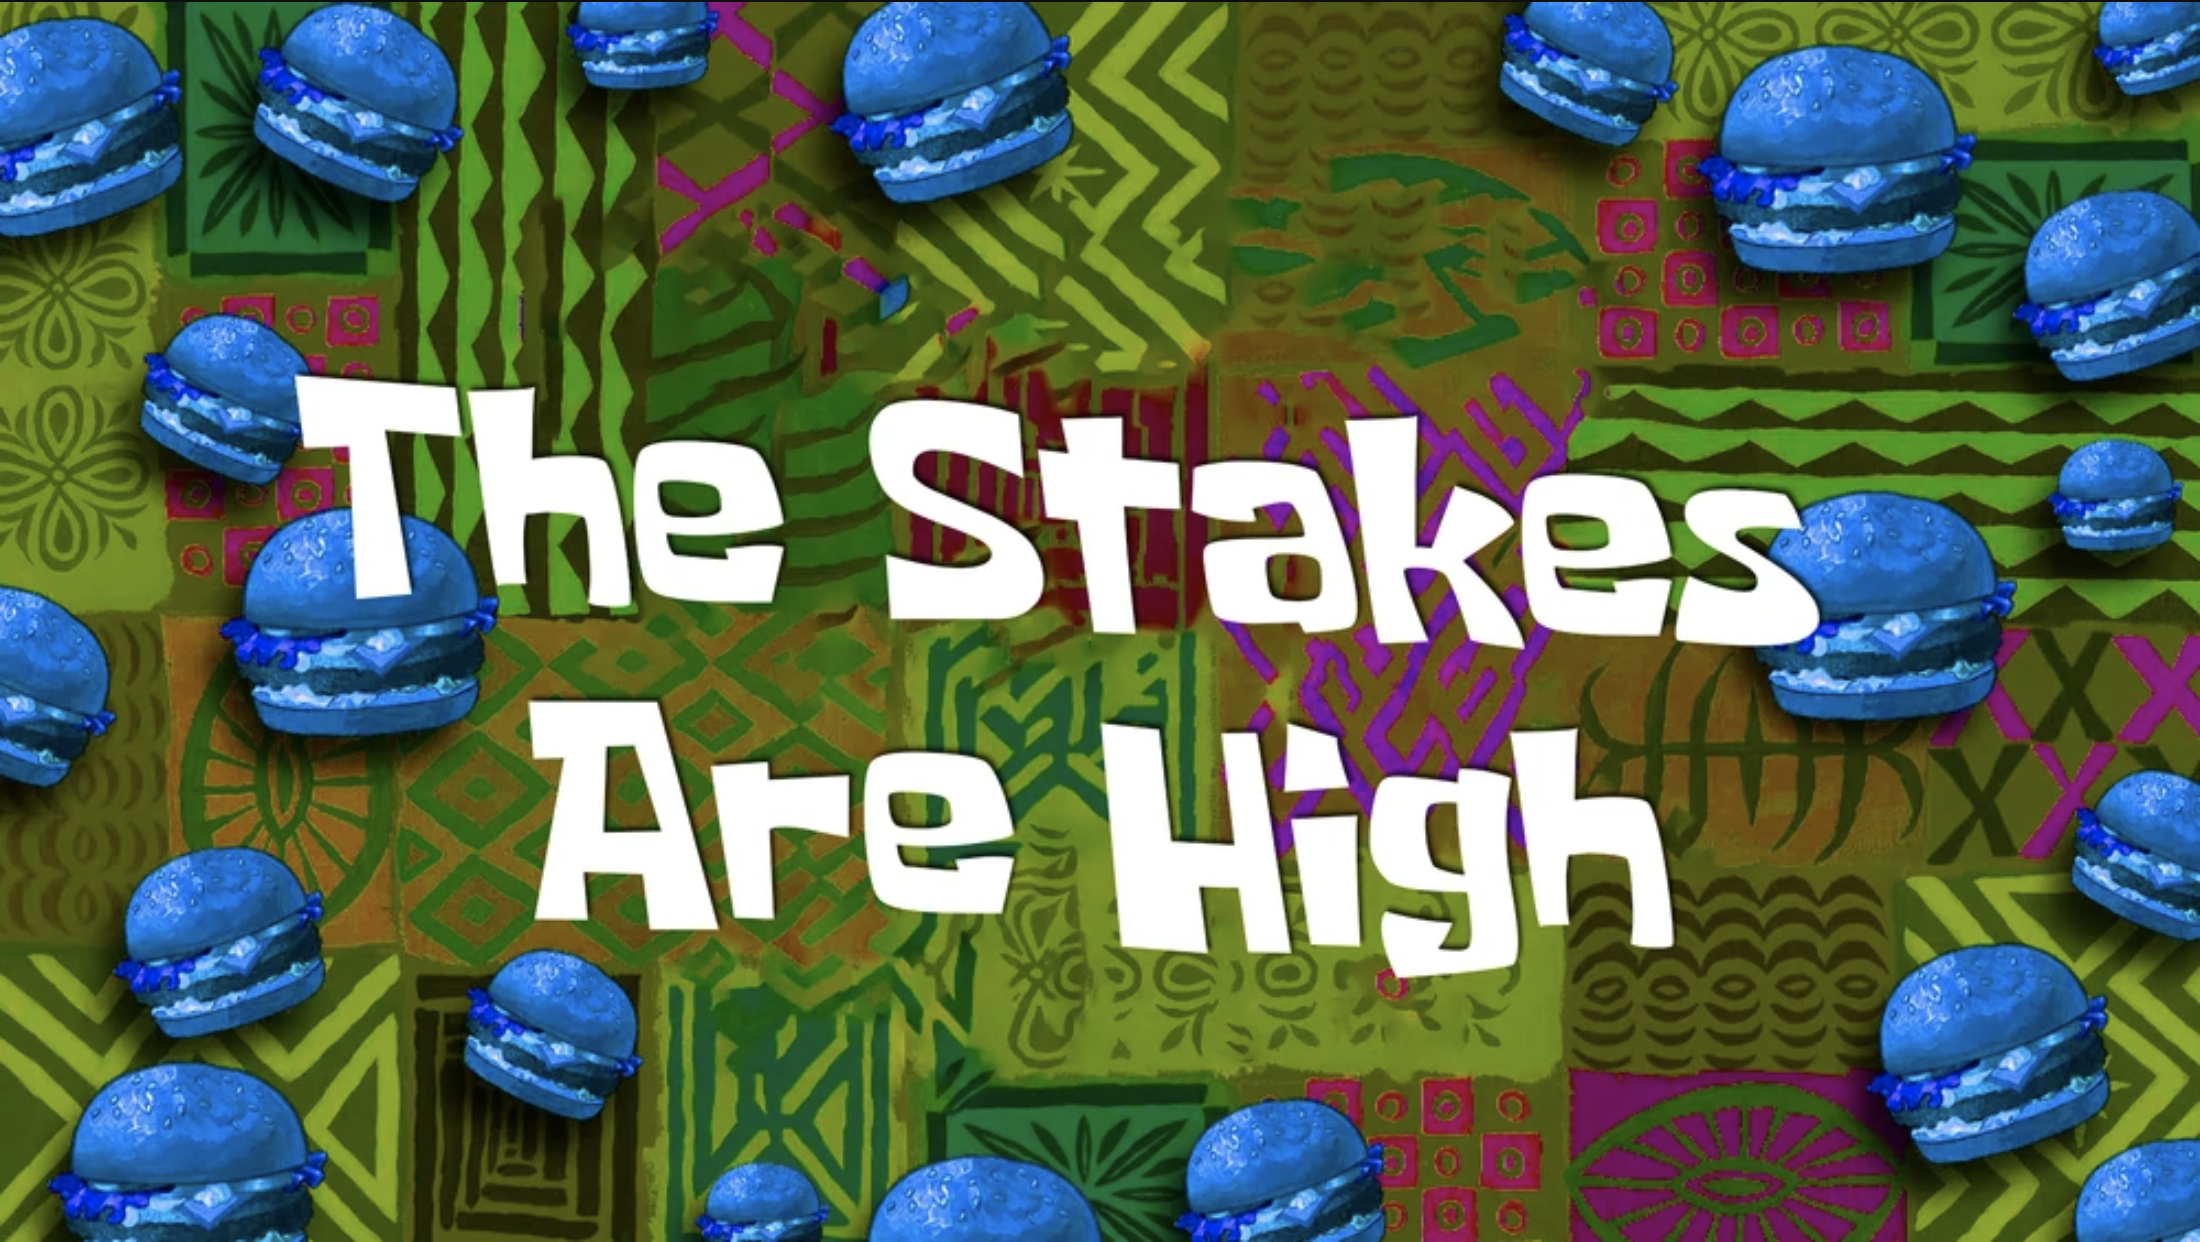 The stakes are high Blank Meme Template